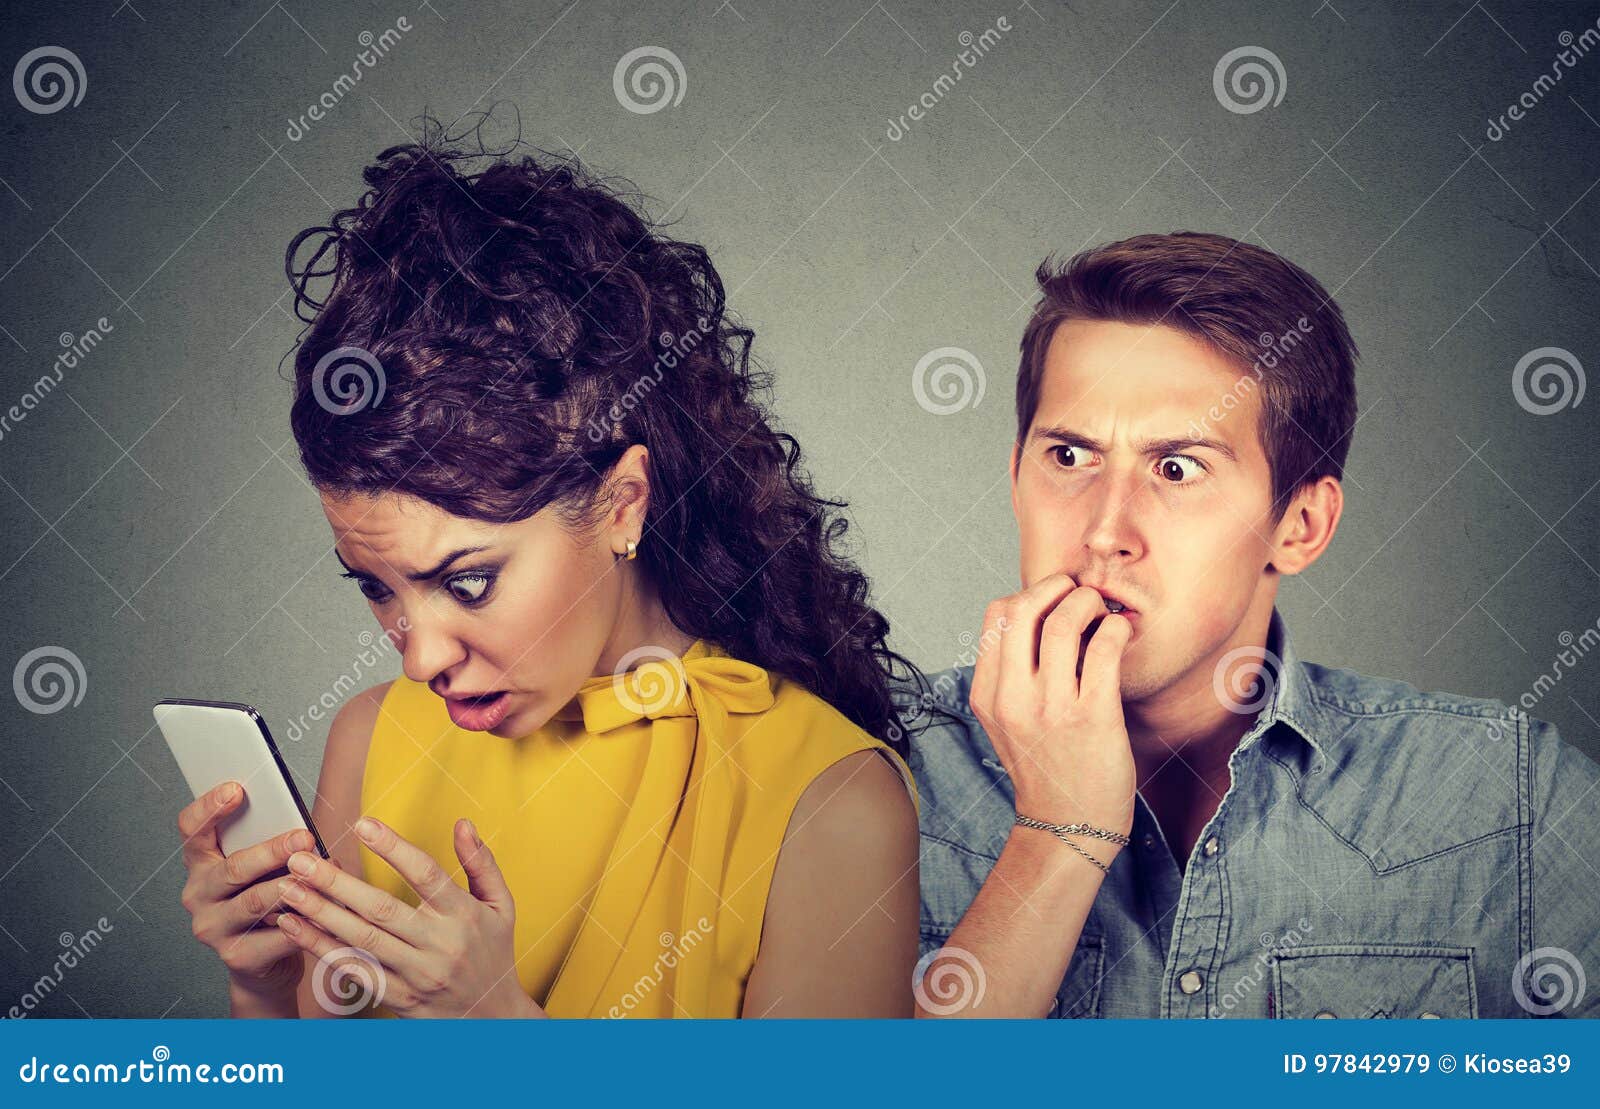 cheating boyfriend. man nervously biting fingernails while shocked girlfriend reading text messages on his mobile phone